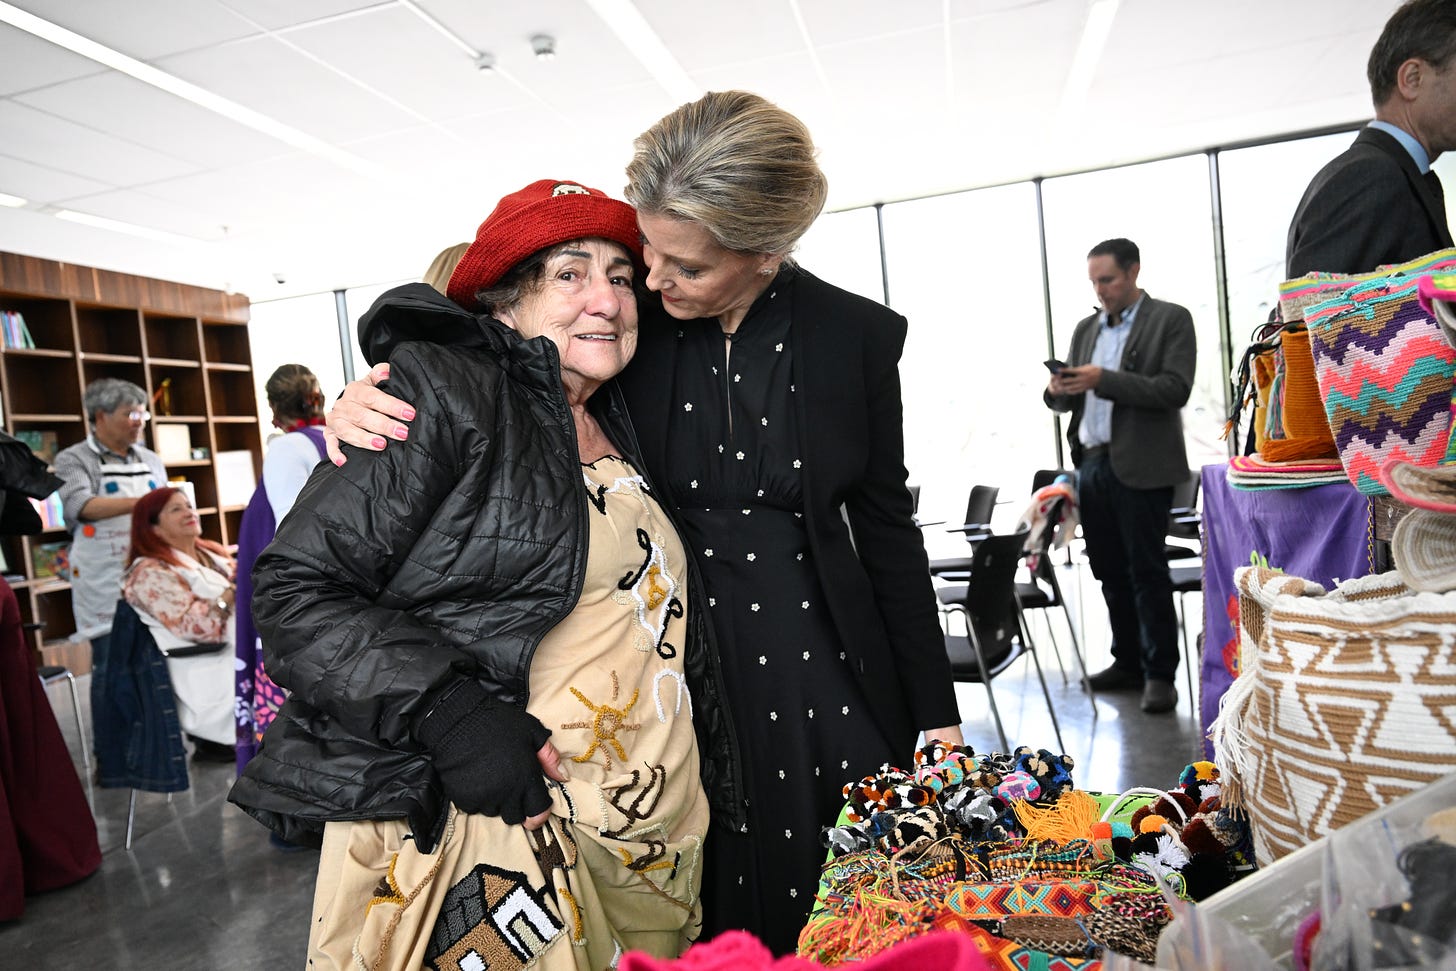 Duchess Sophie hugging a woman in a red hat